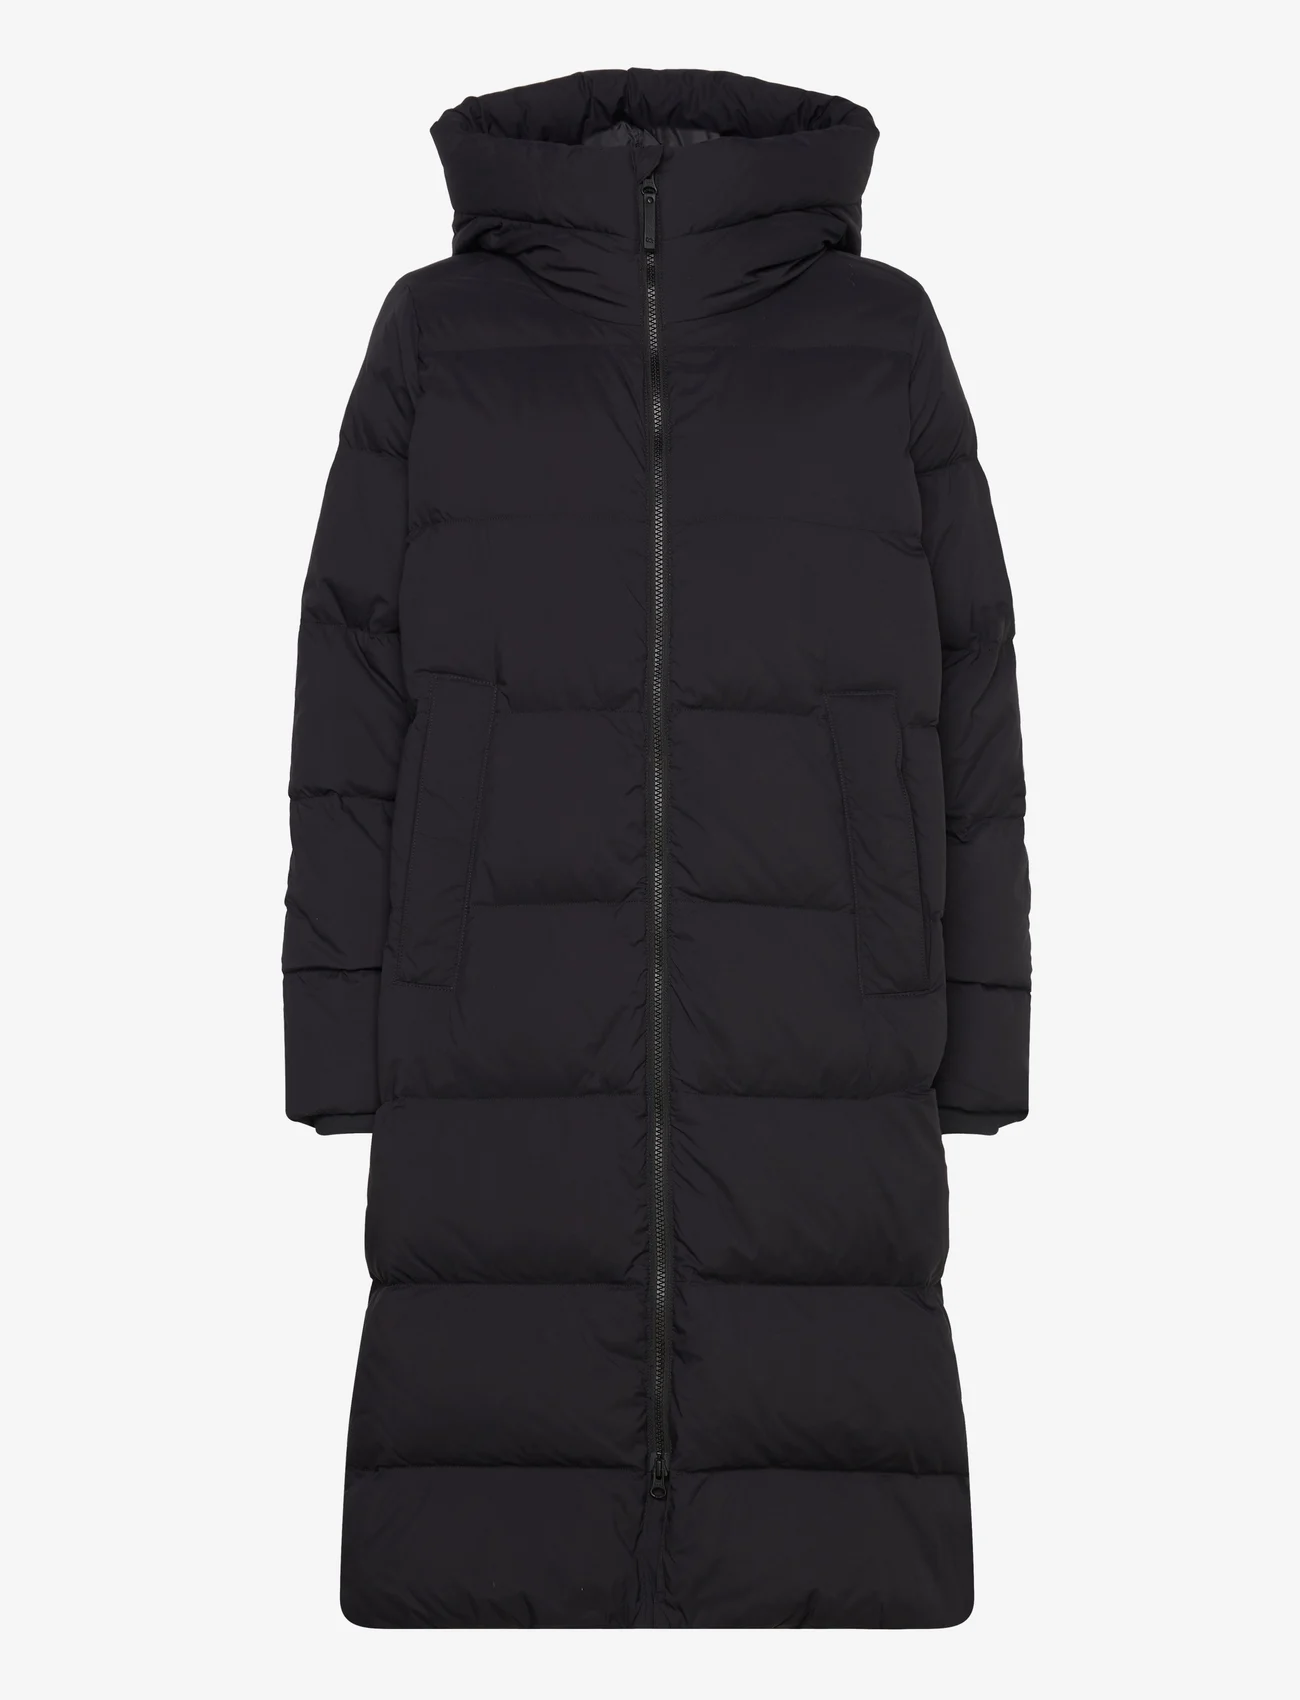 Outdoor Research - W COZE DOWN PARKA - winter coats - solid black - 0